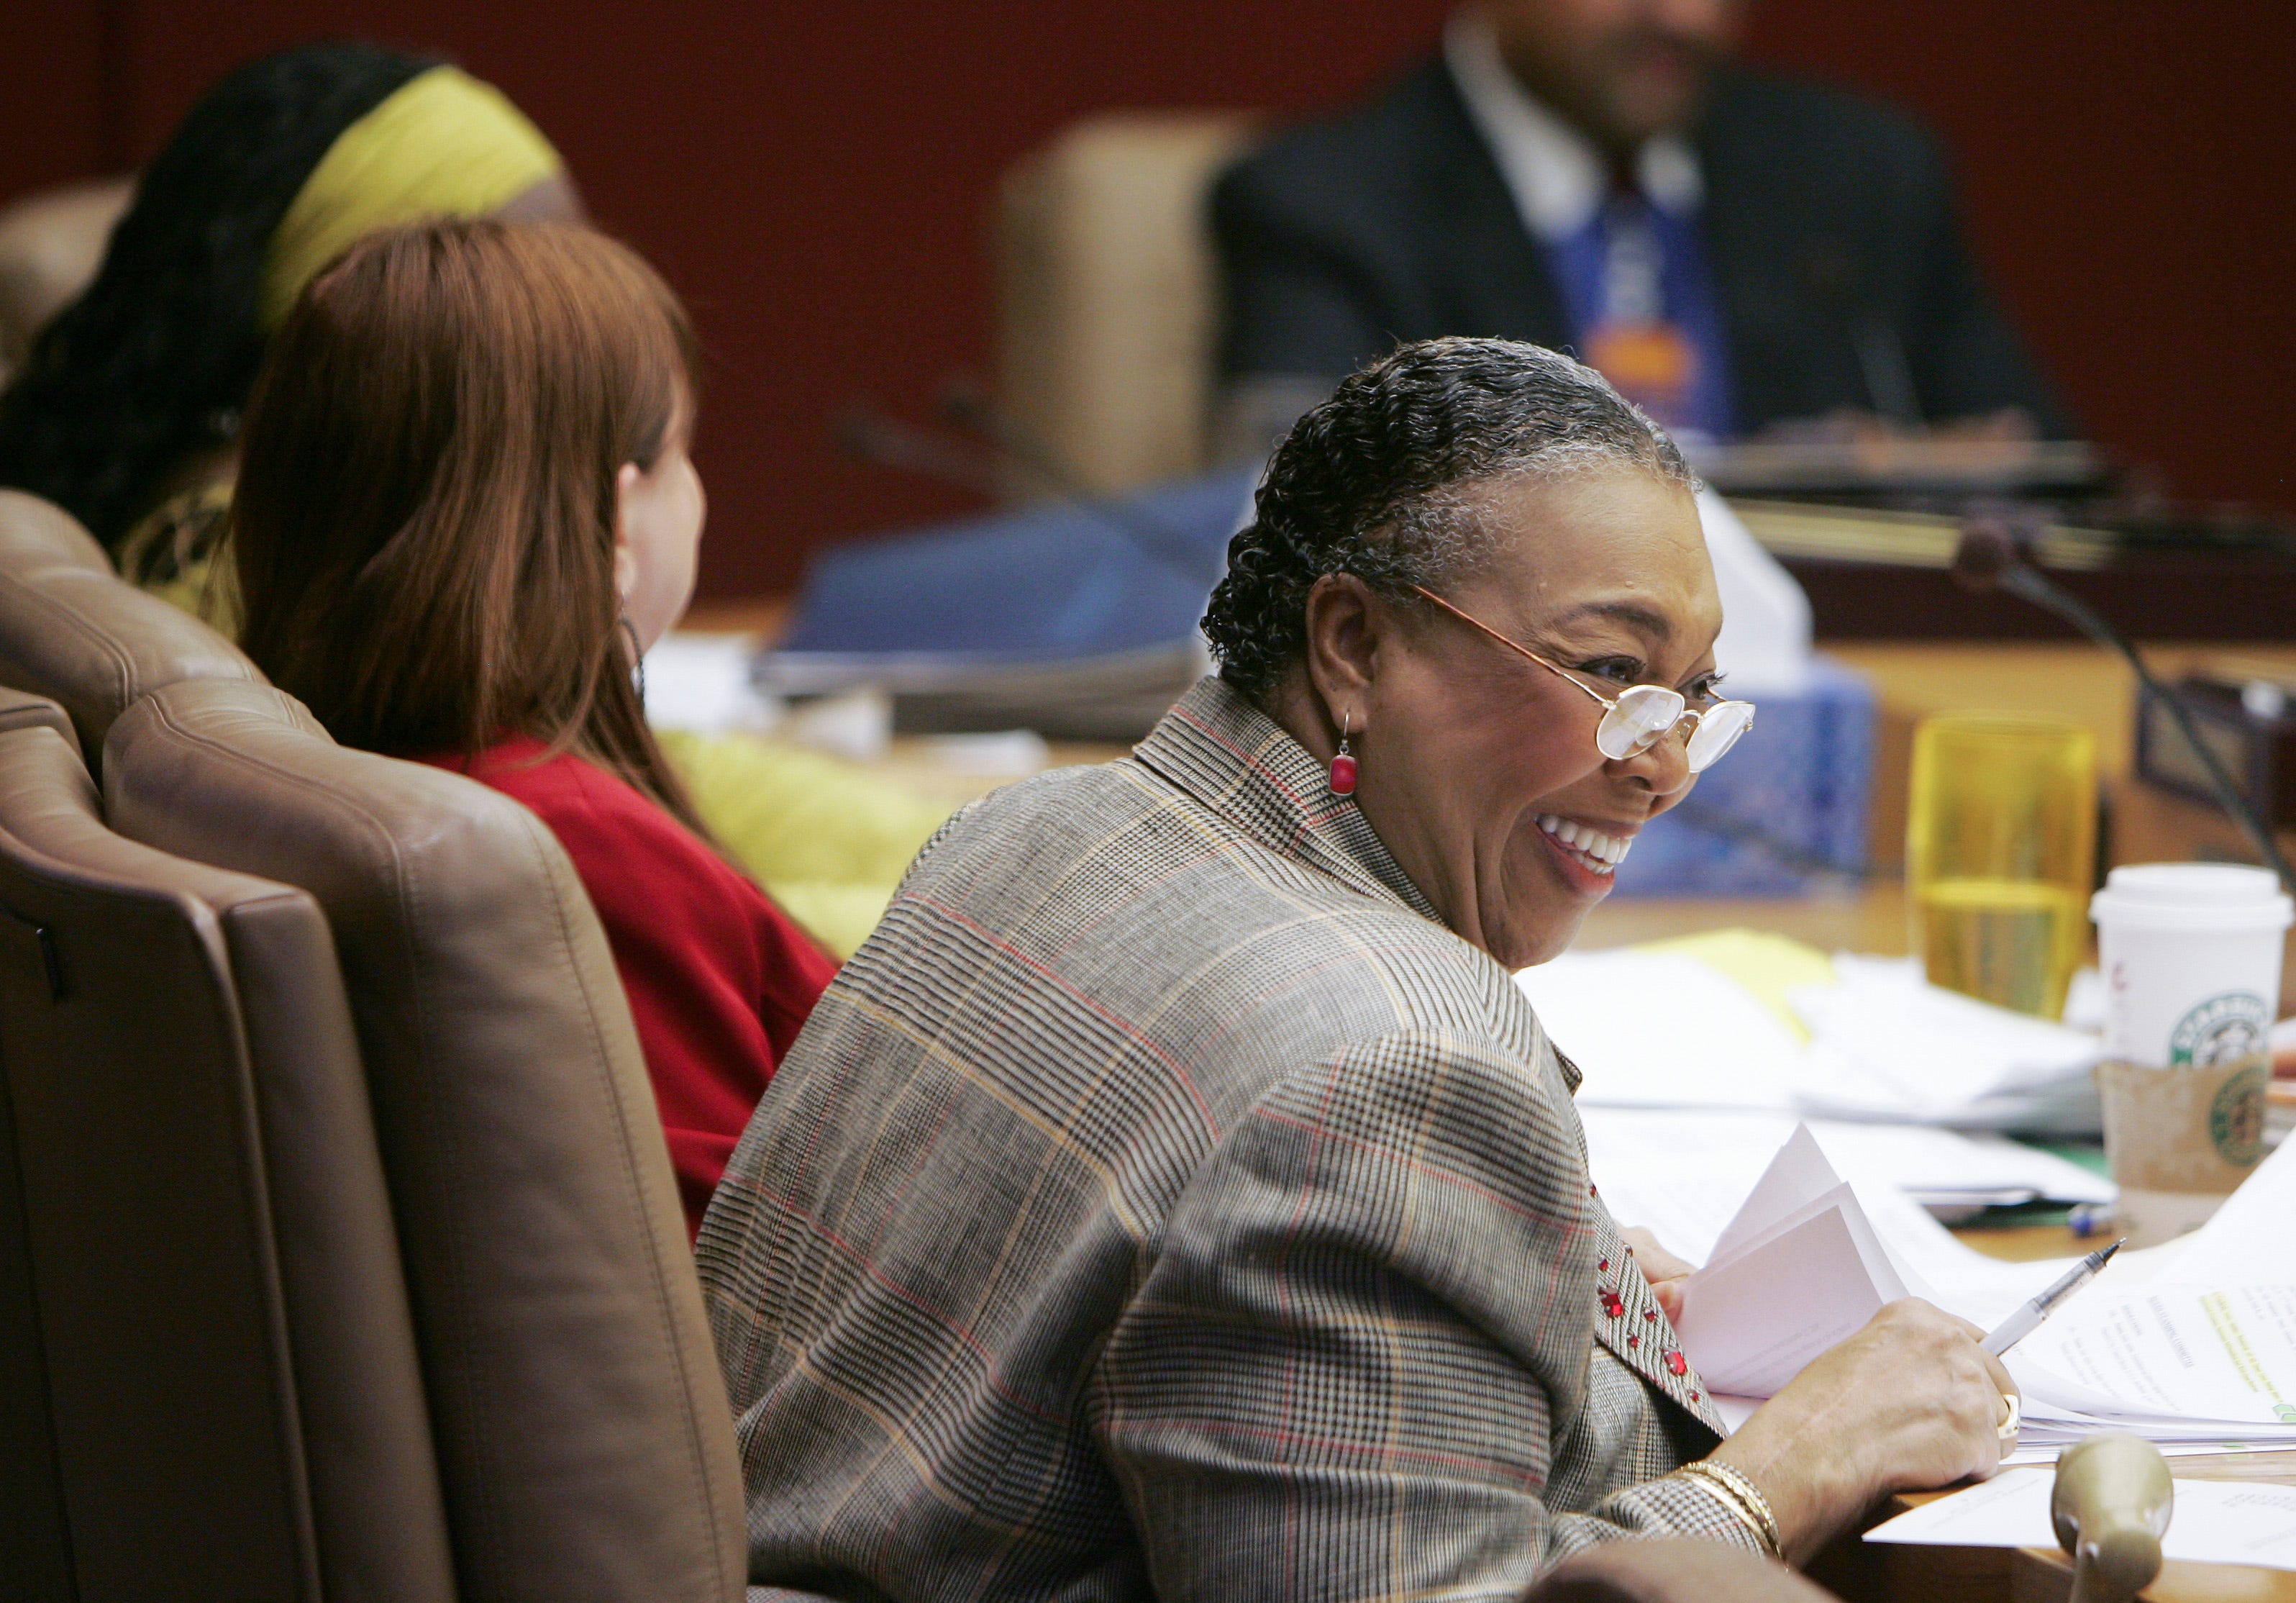 Council member Barbara-Rose Collins attends a council meeting at the City County Building in Detroit on Feb. 5, 2008. The longtime community activist and Detroit congresswoman died at the age of 82, her family announced in a statement on Thursday, Nov. 4, 2021.